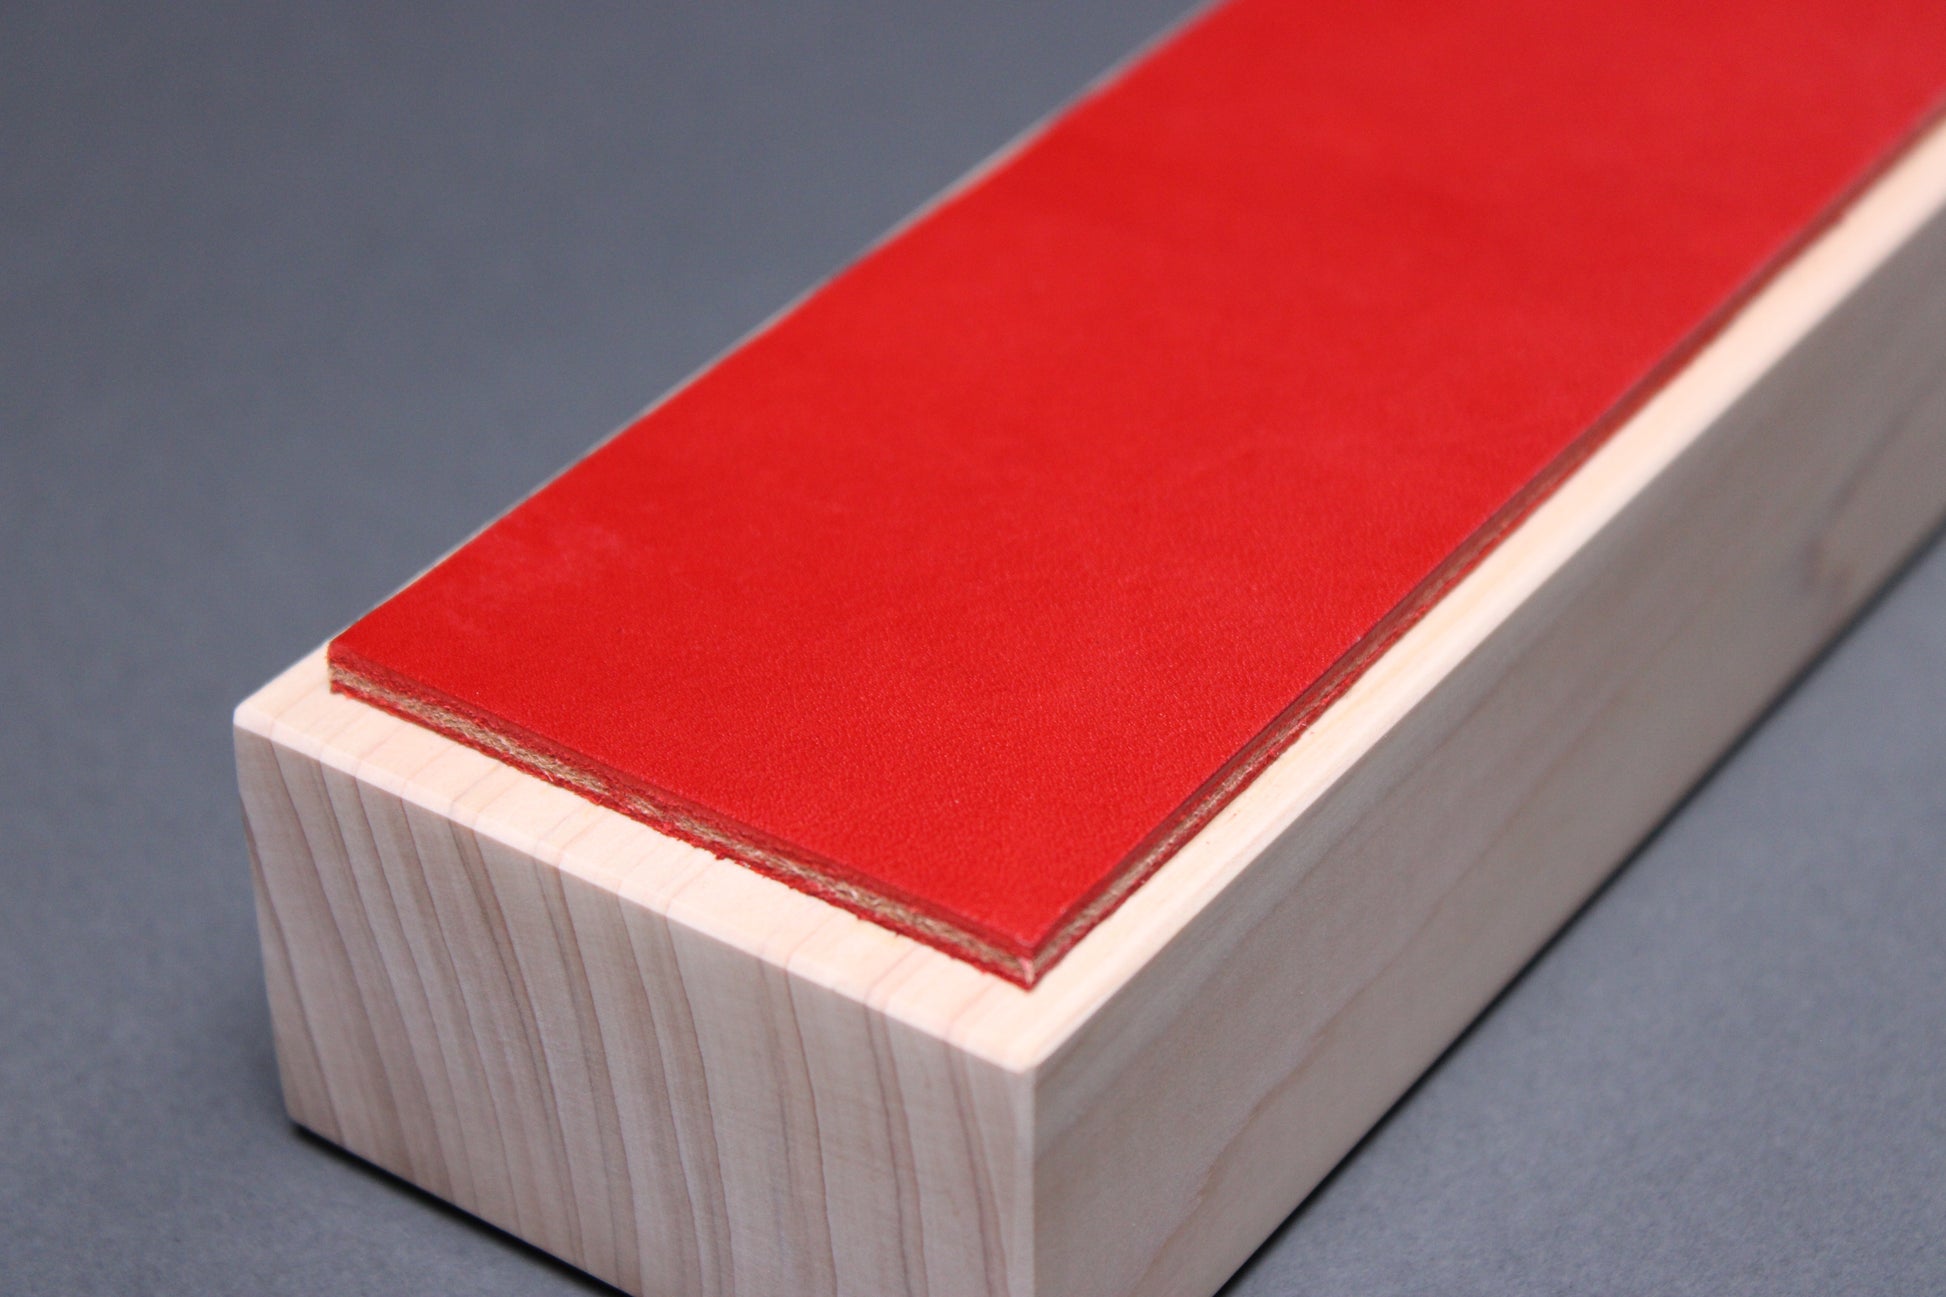 textured surface of vermilion red leather perfect for knife stropping atop sturdy tall hinoki wood base adequate height for knuckle clearance with grey background closeup shot